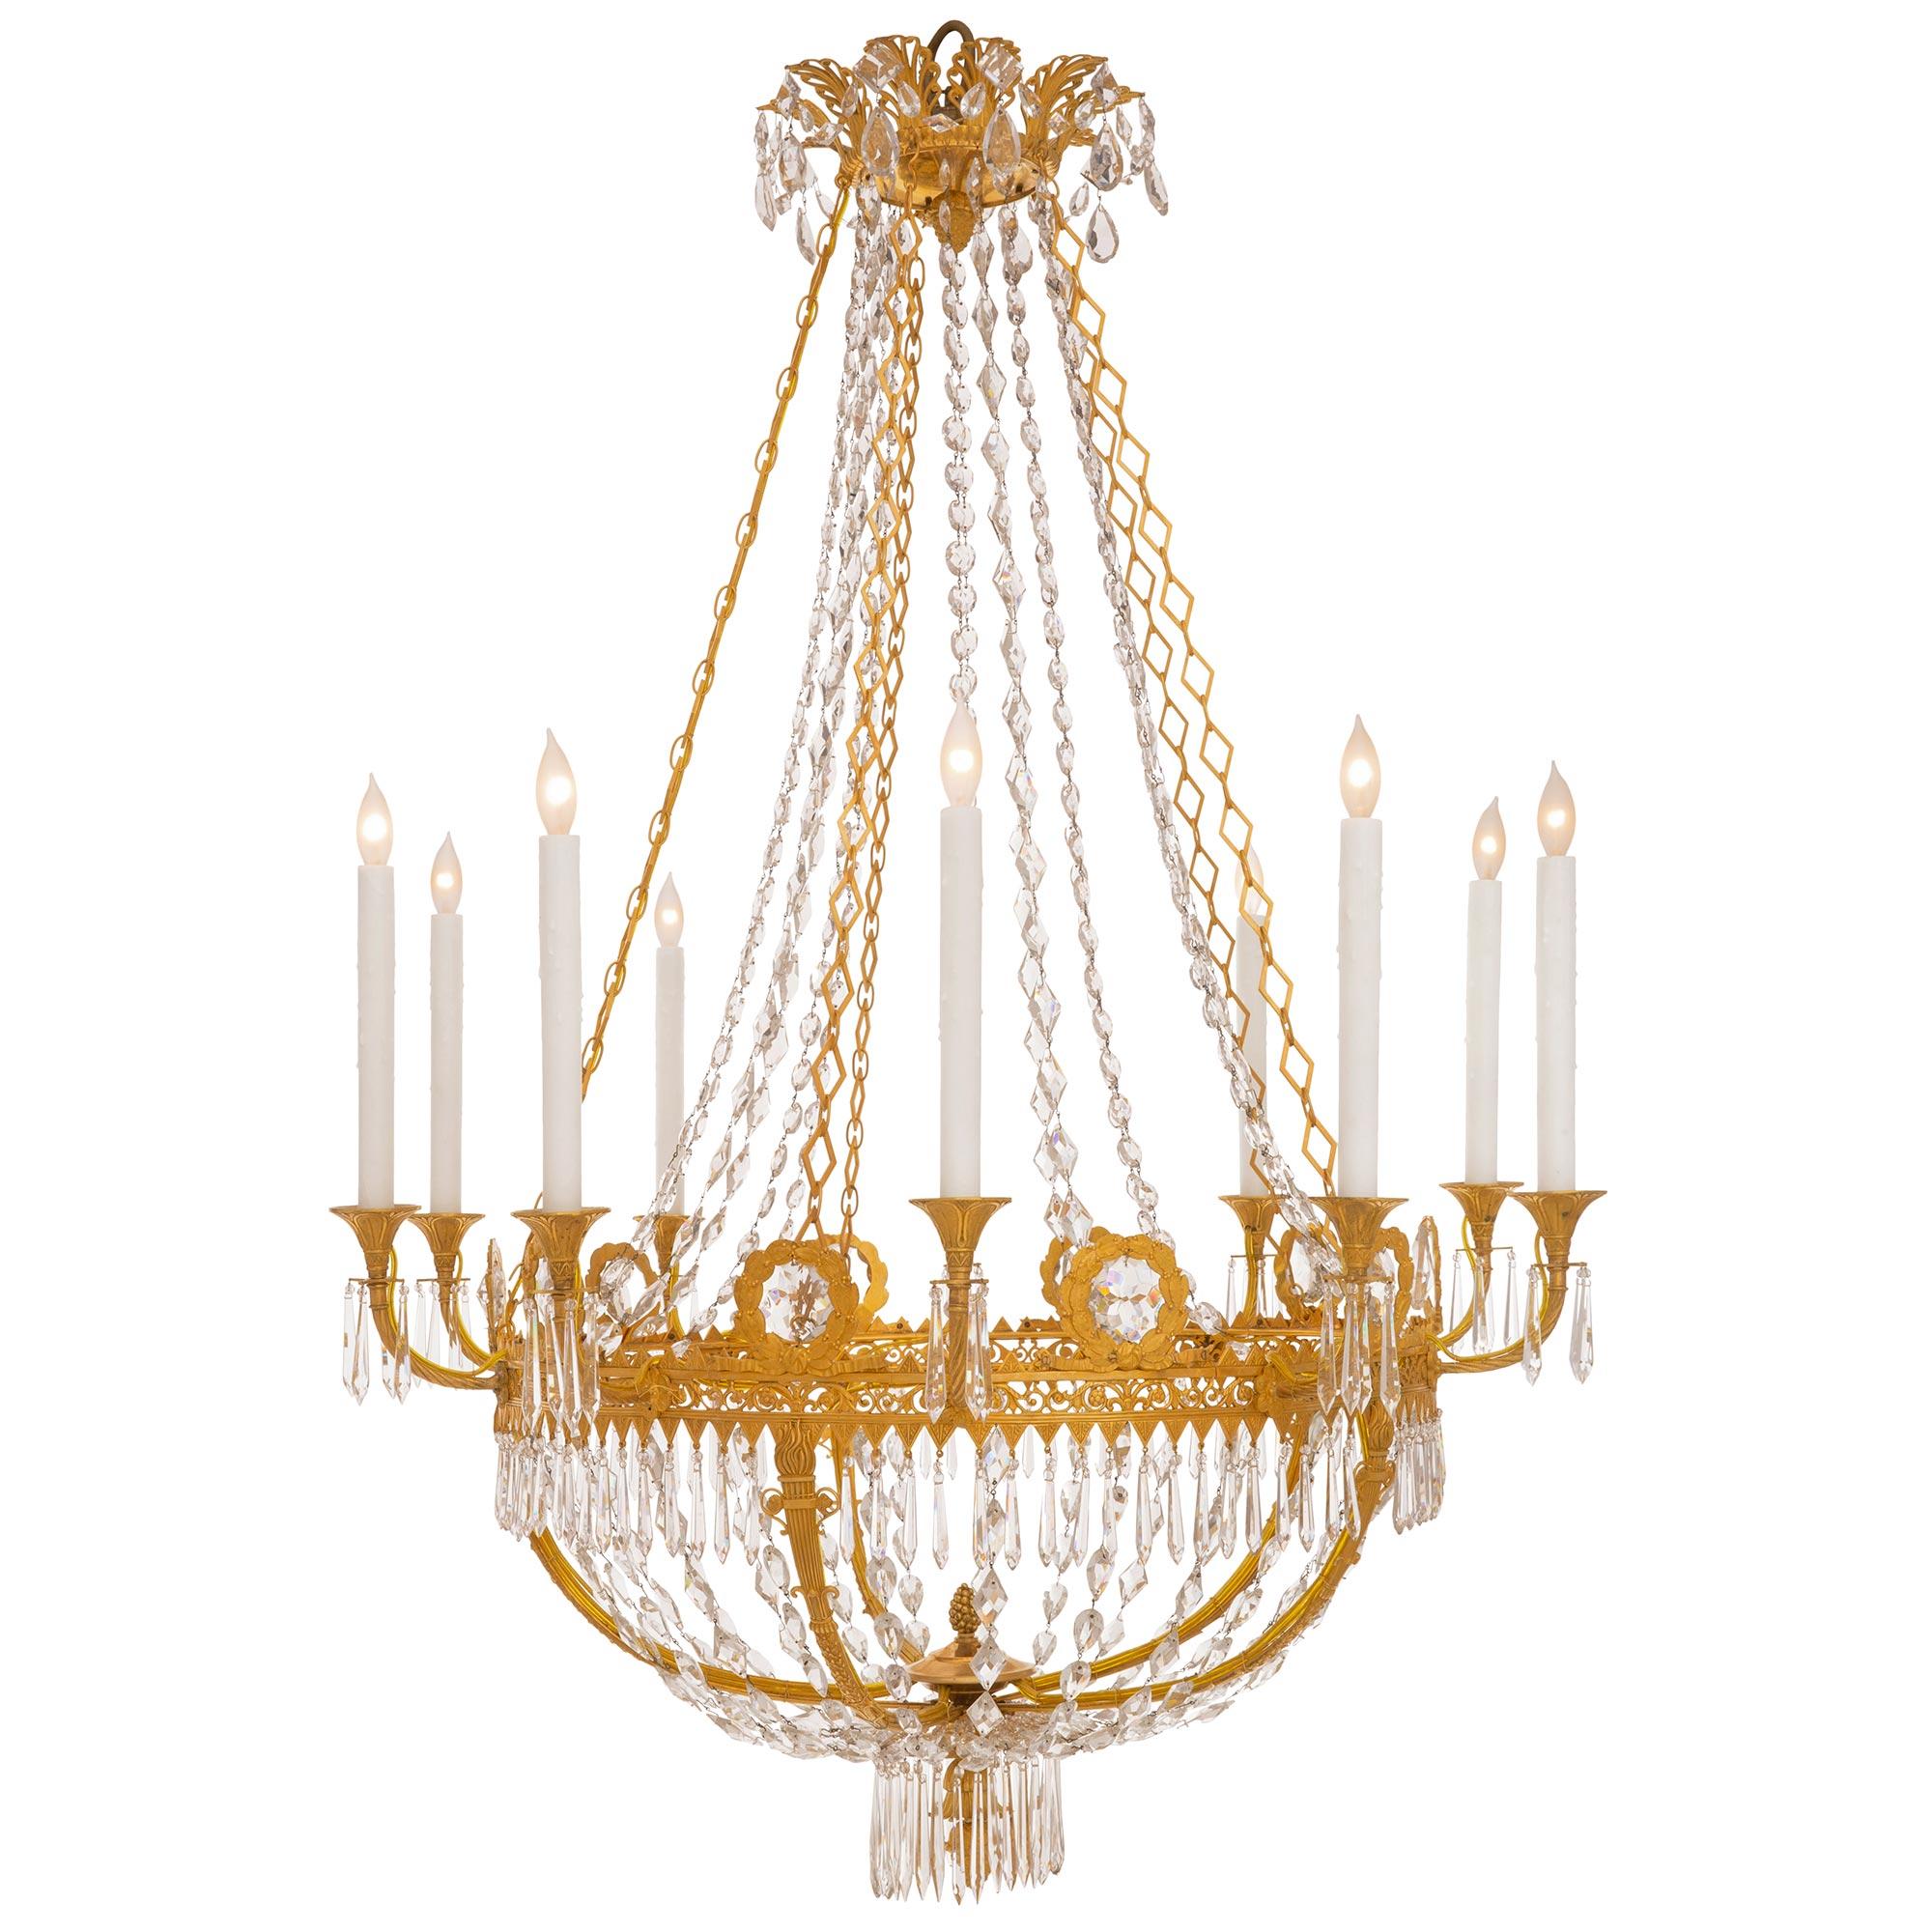 French Early 19th Century 1st Empire Period Crystal and Ormolu Chandelier In Good Condition For Sale In West Palm Beach, FL